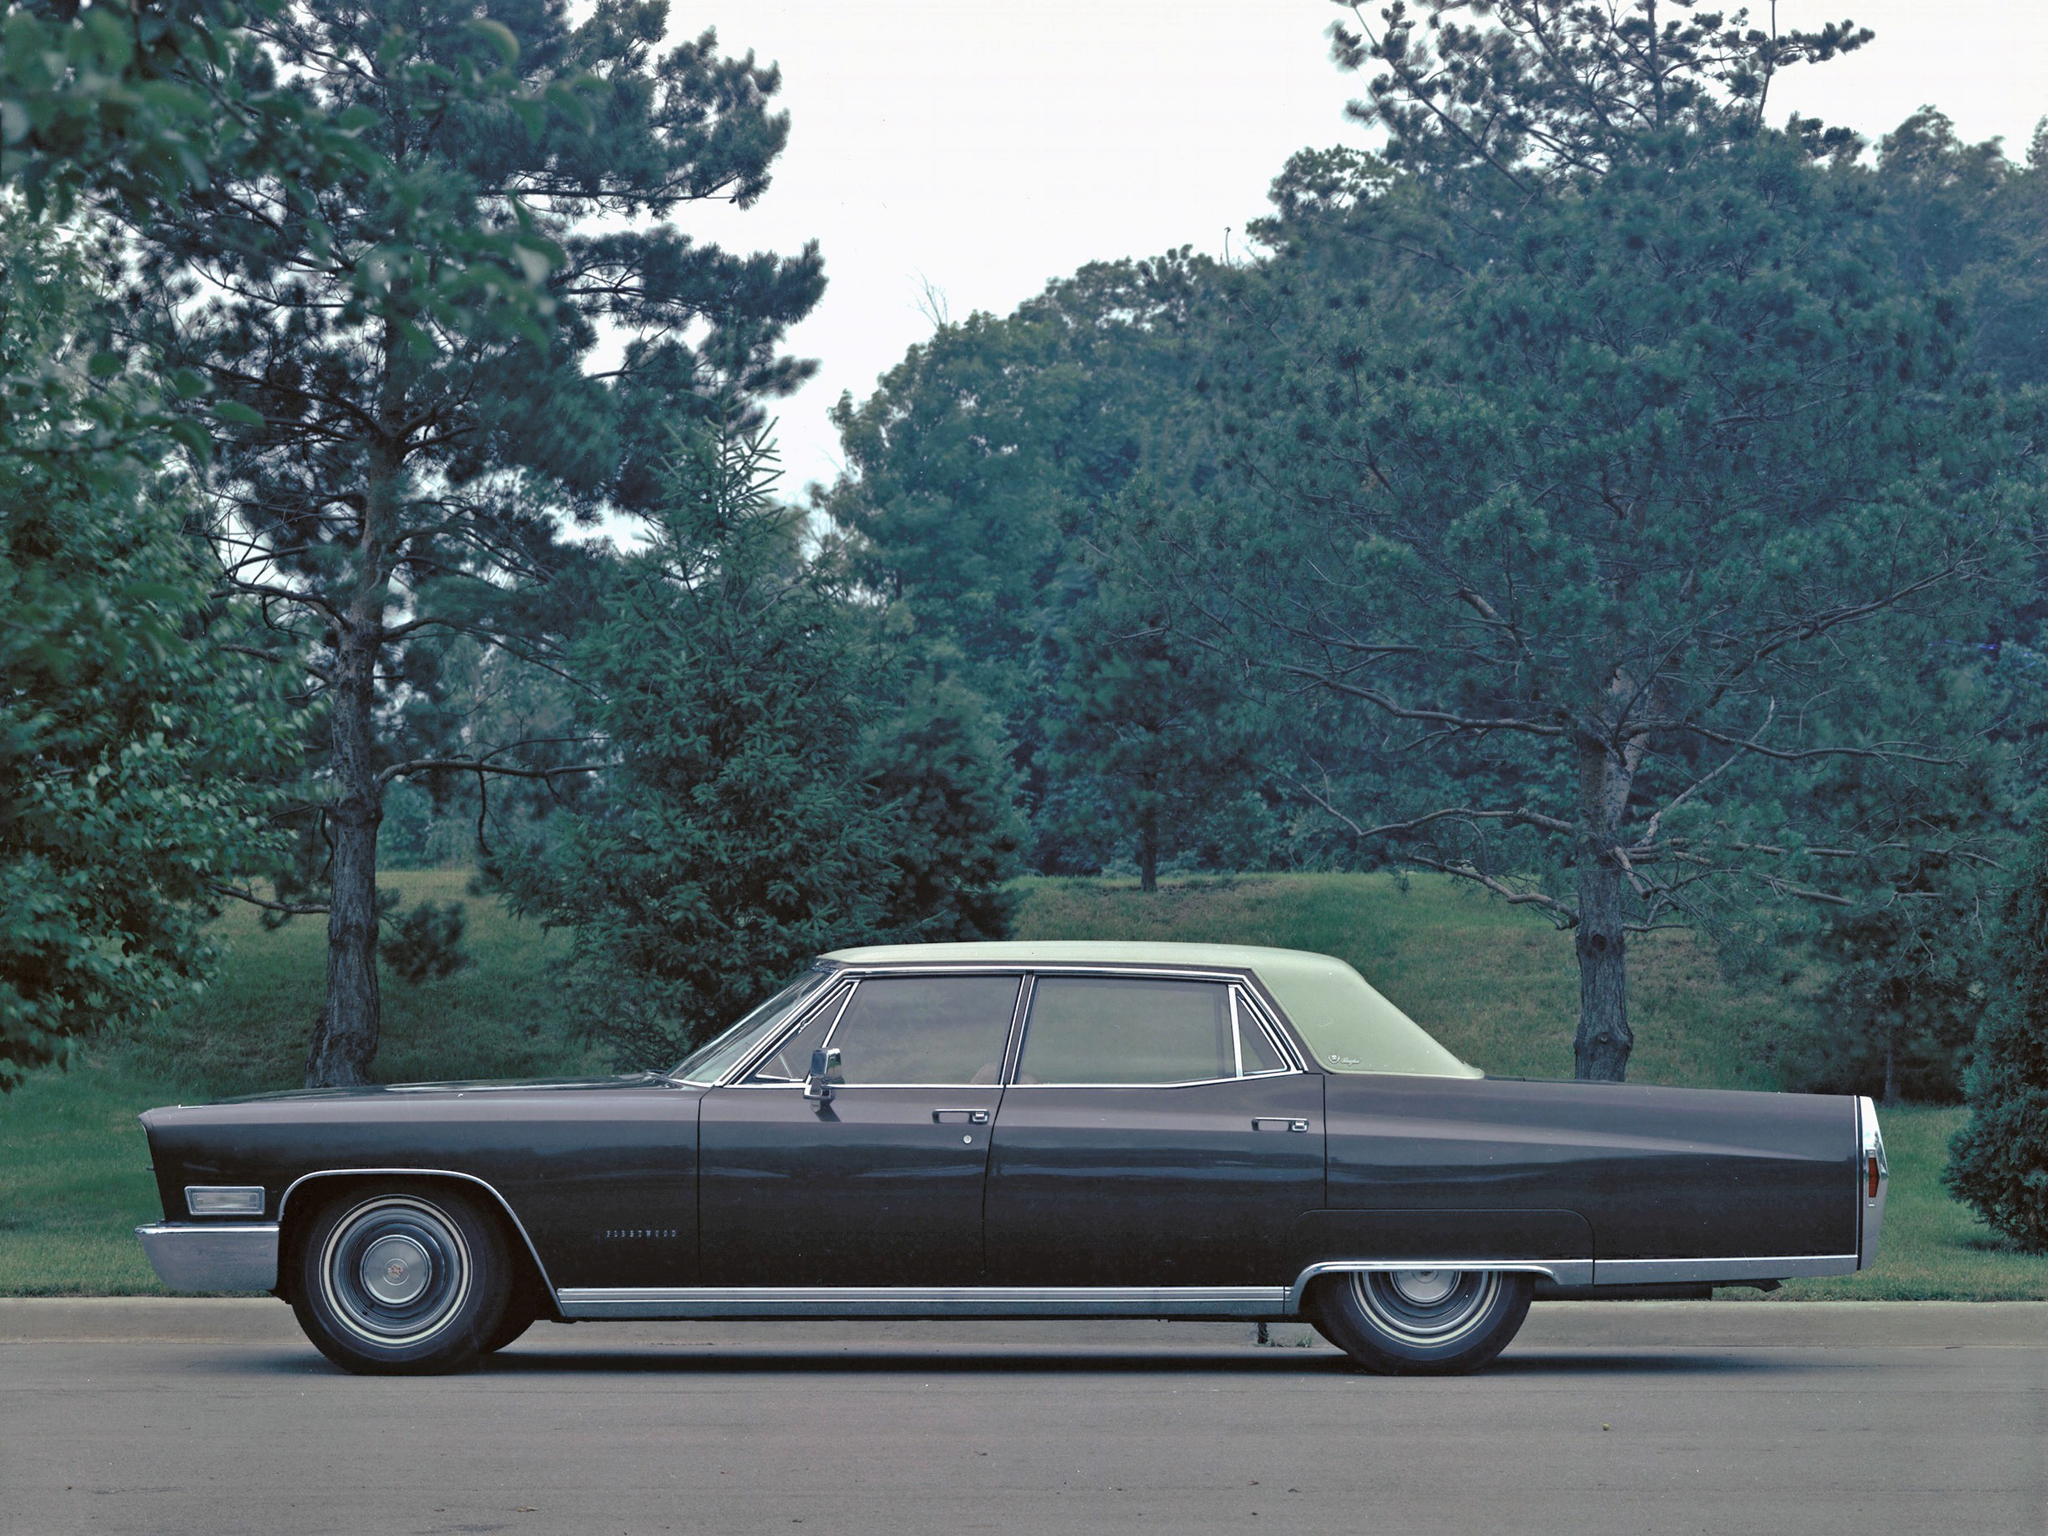 1968, Cadillac, Fleetwood, Sixty, Special, 68069 m, Luxury, Classic Wallpaper